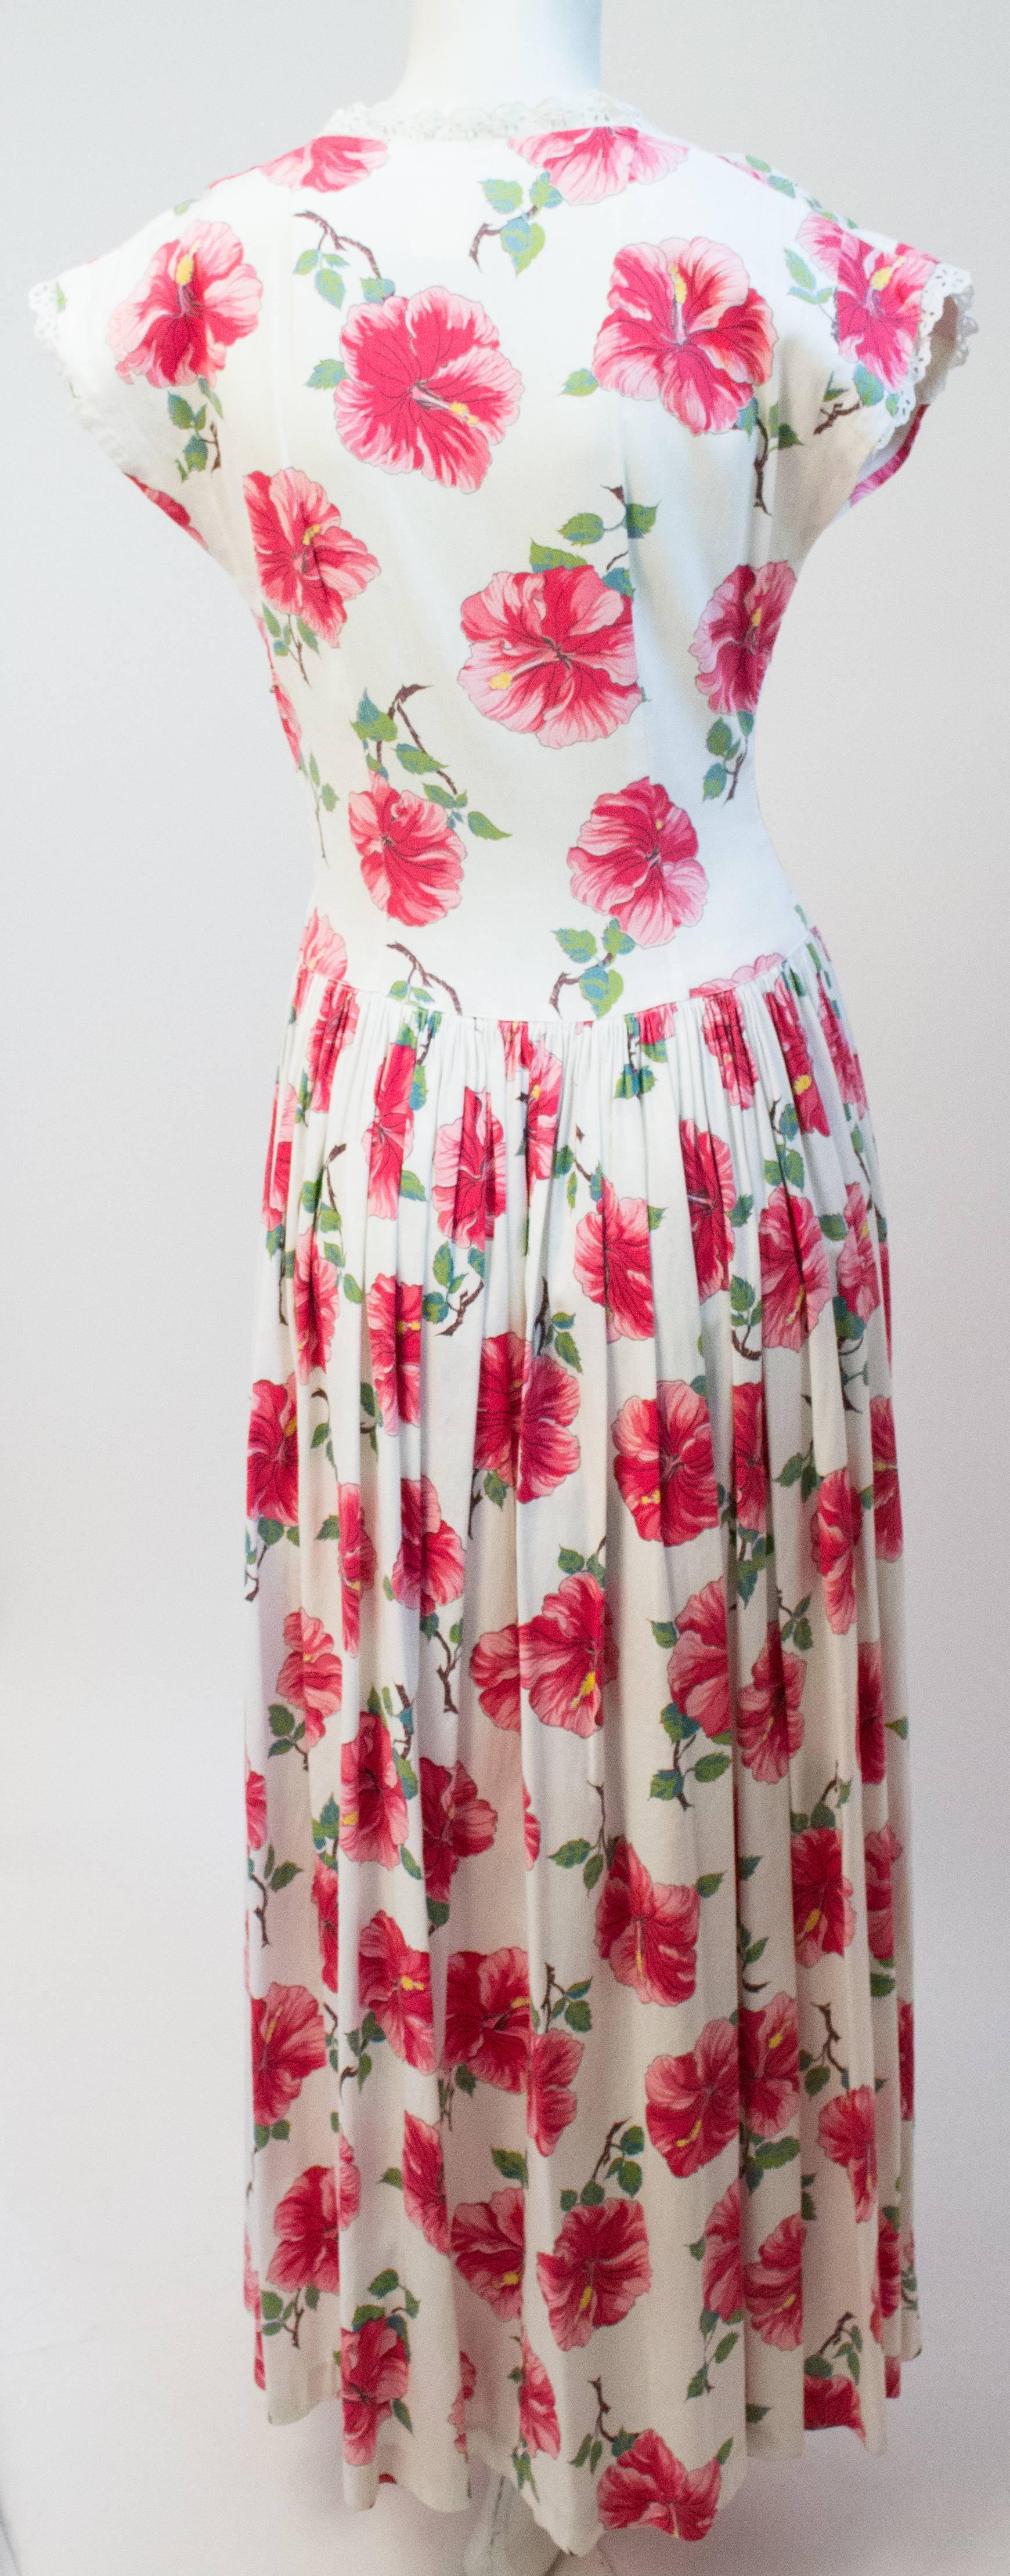 40s Floral Printed Day Dress. Printed grosgrain fabric. Front snap closure and metal side zip.